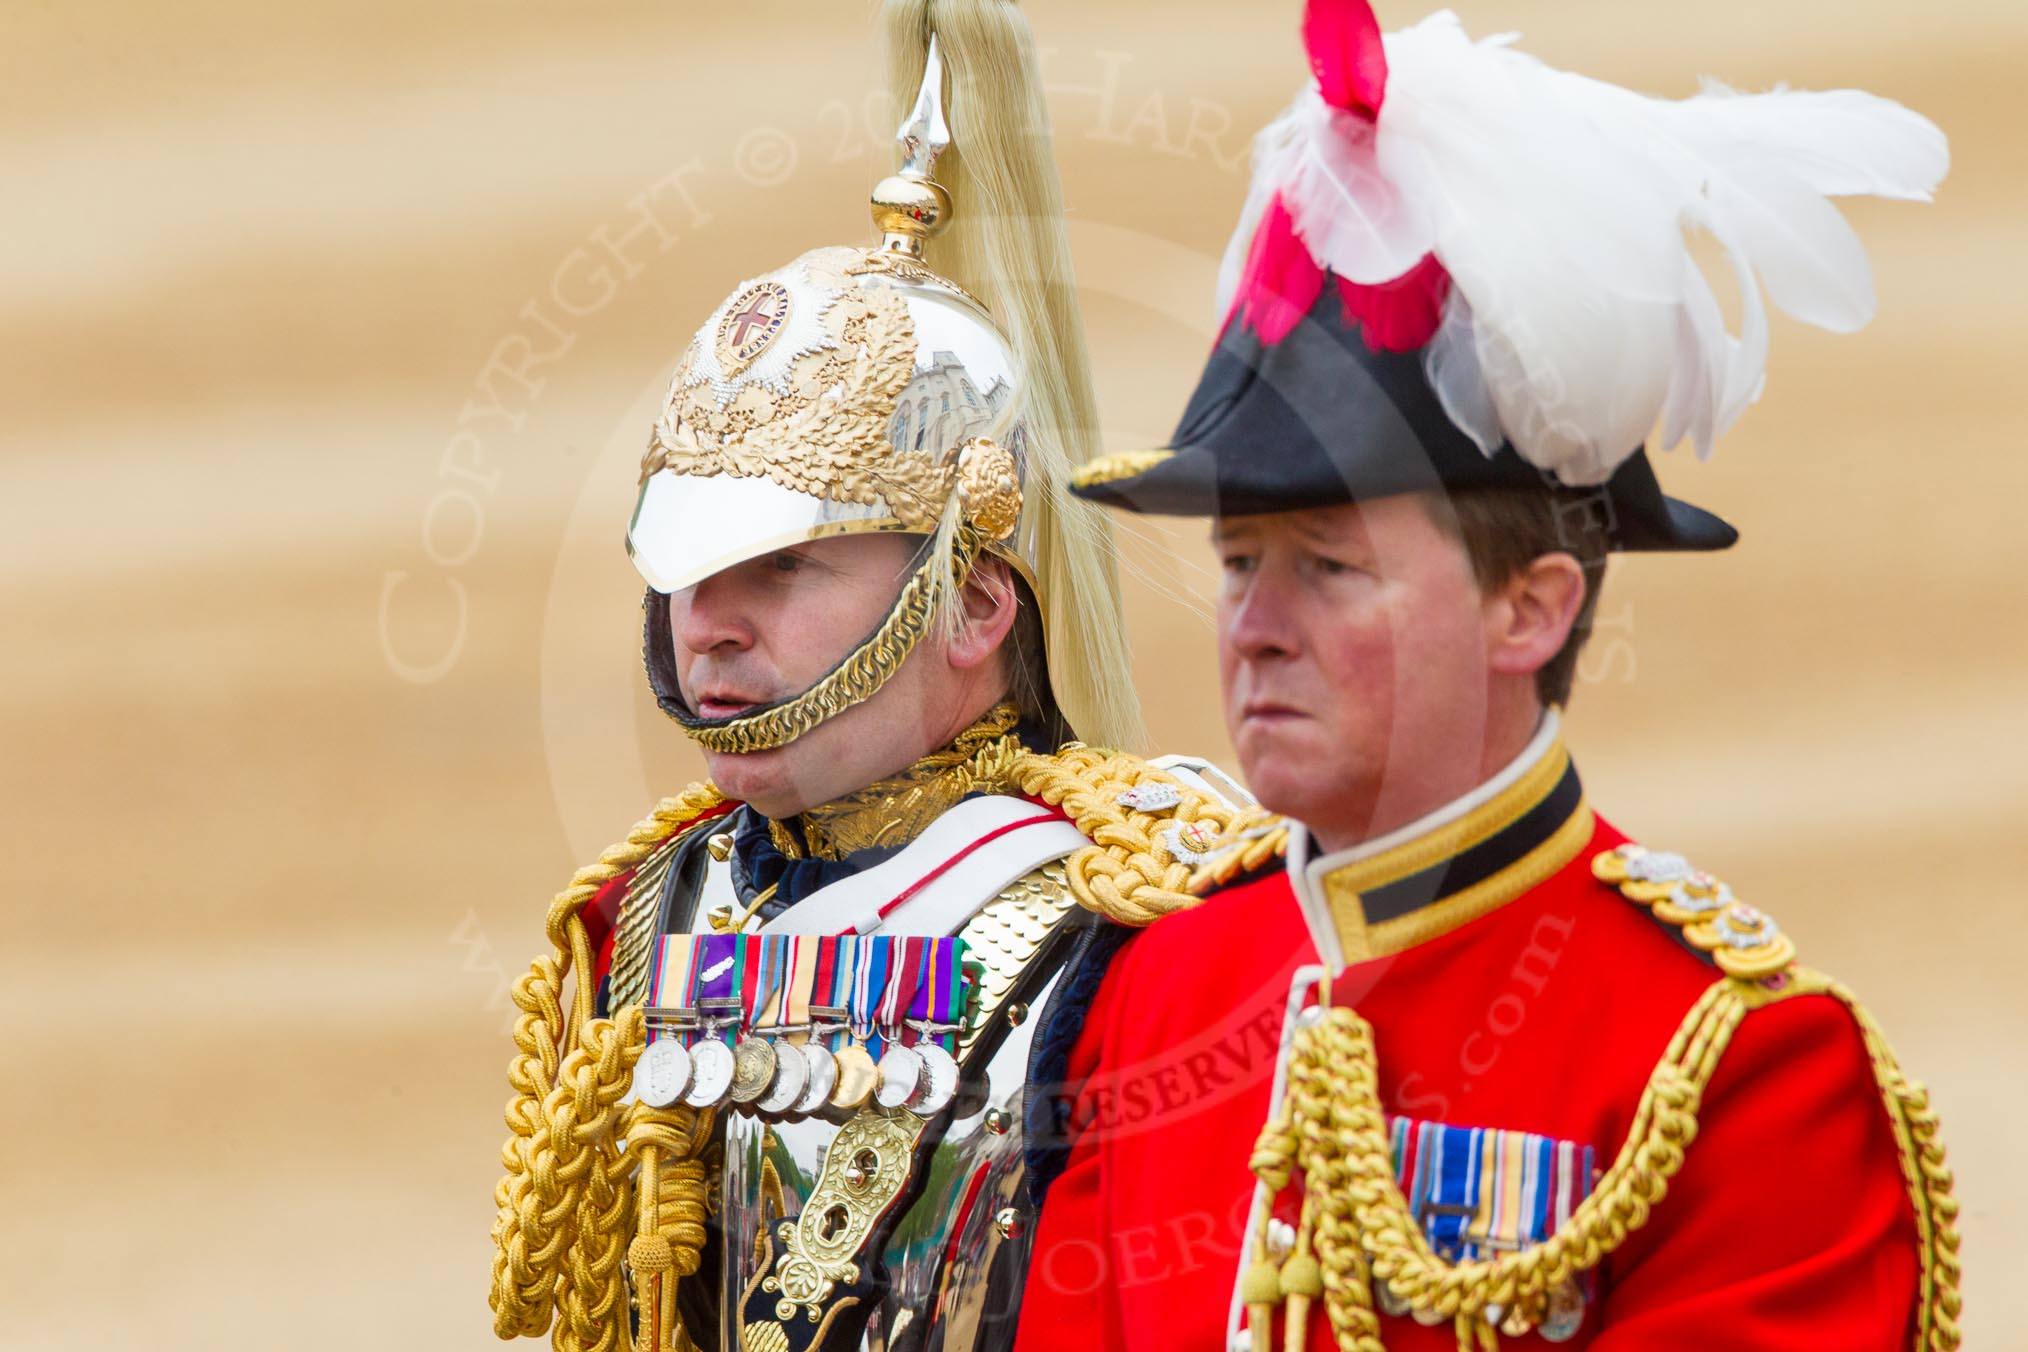 The Colonel's Review 2016.
Horse Guards Parade, Westminster,
London,

United Kingdom,
on 04 June 2016 at 11:01, image #186